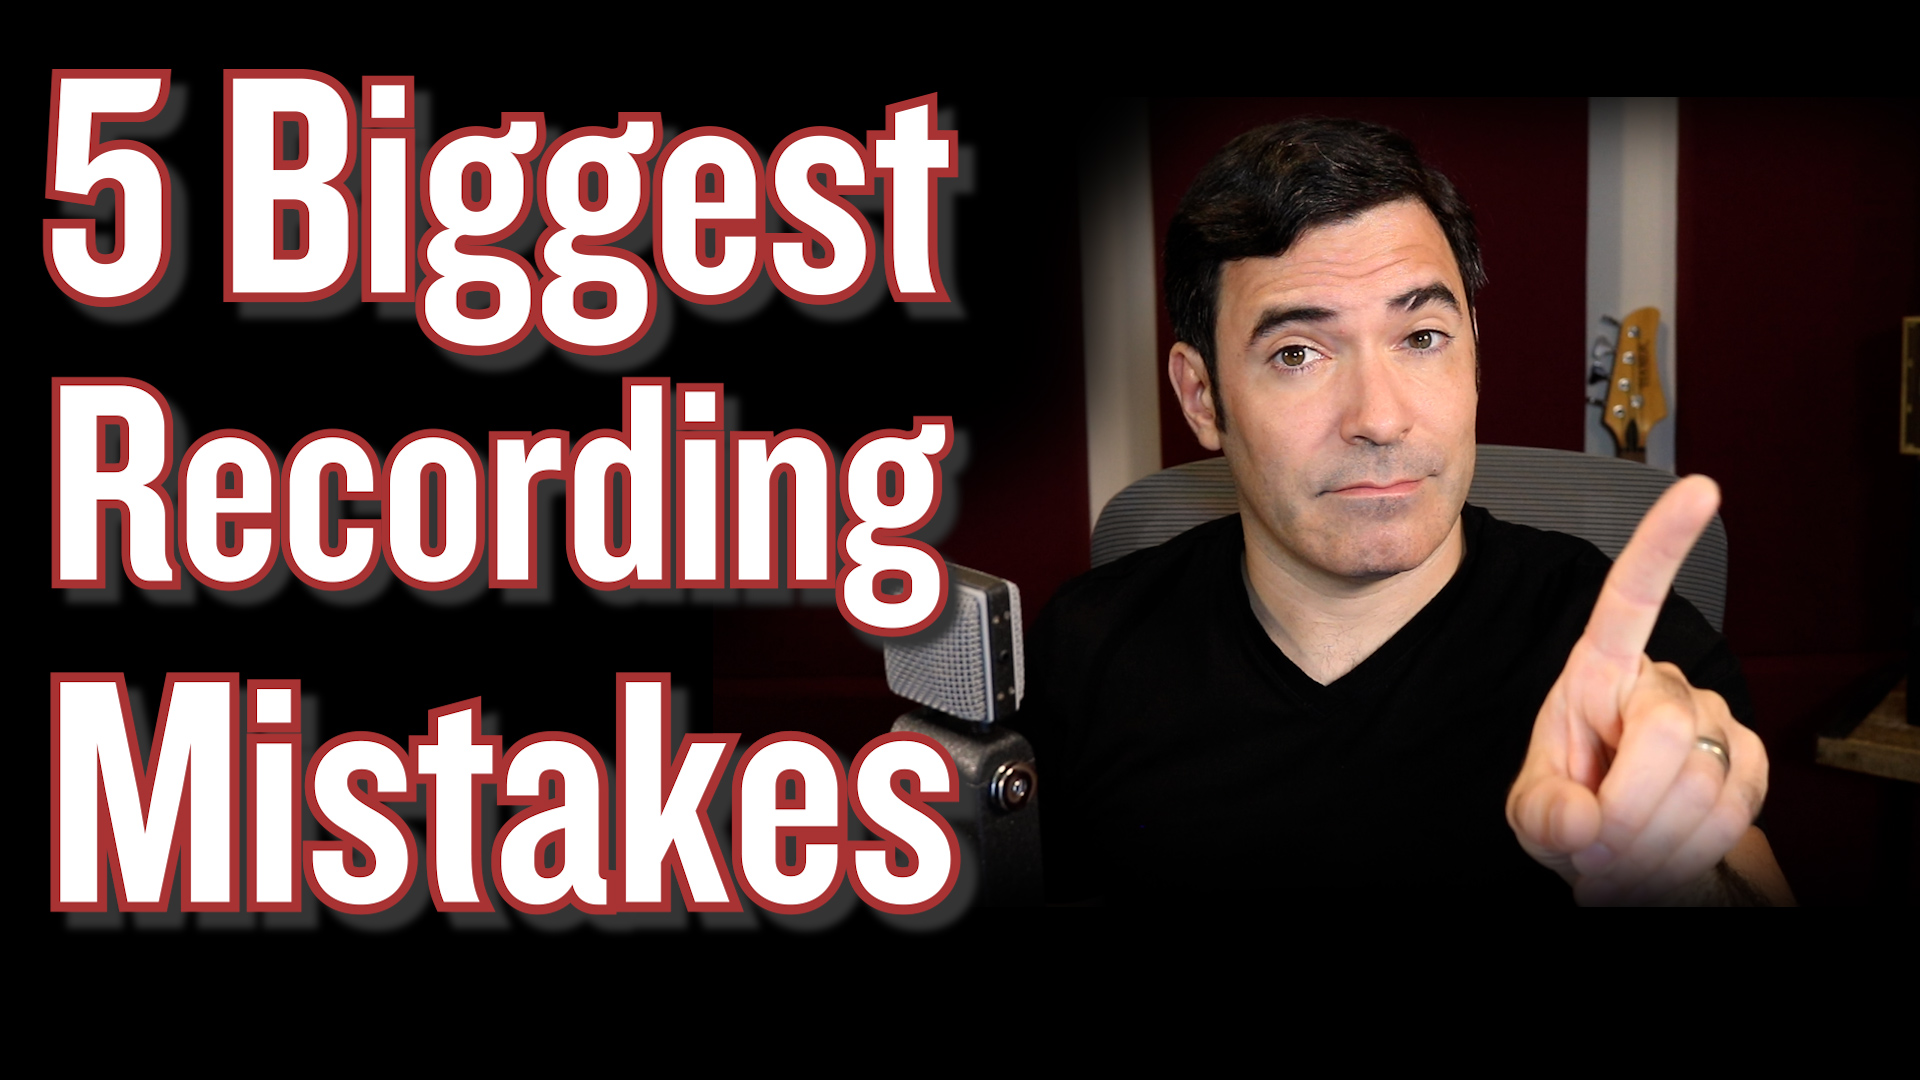 The Top 5 Recording Mistakes You Will Definitely Make